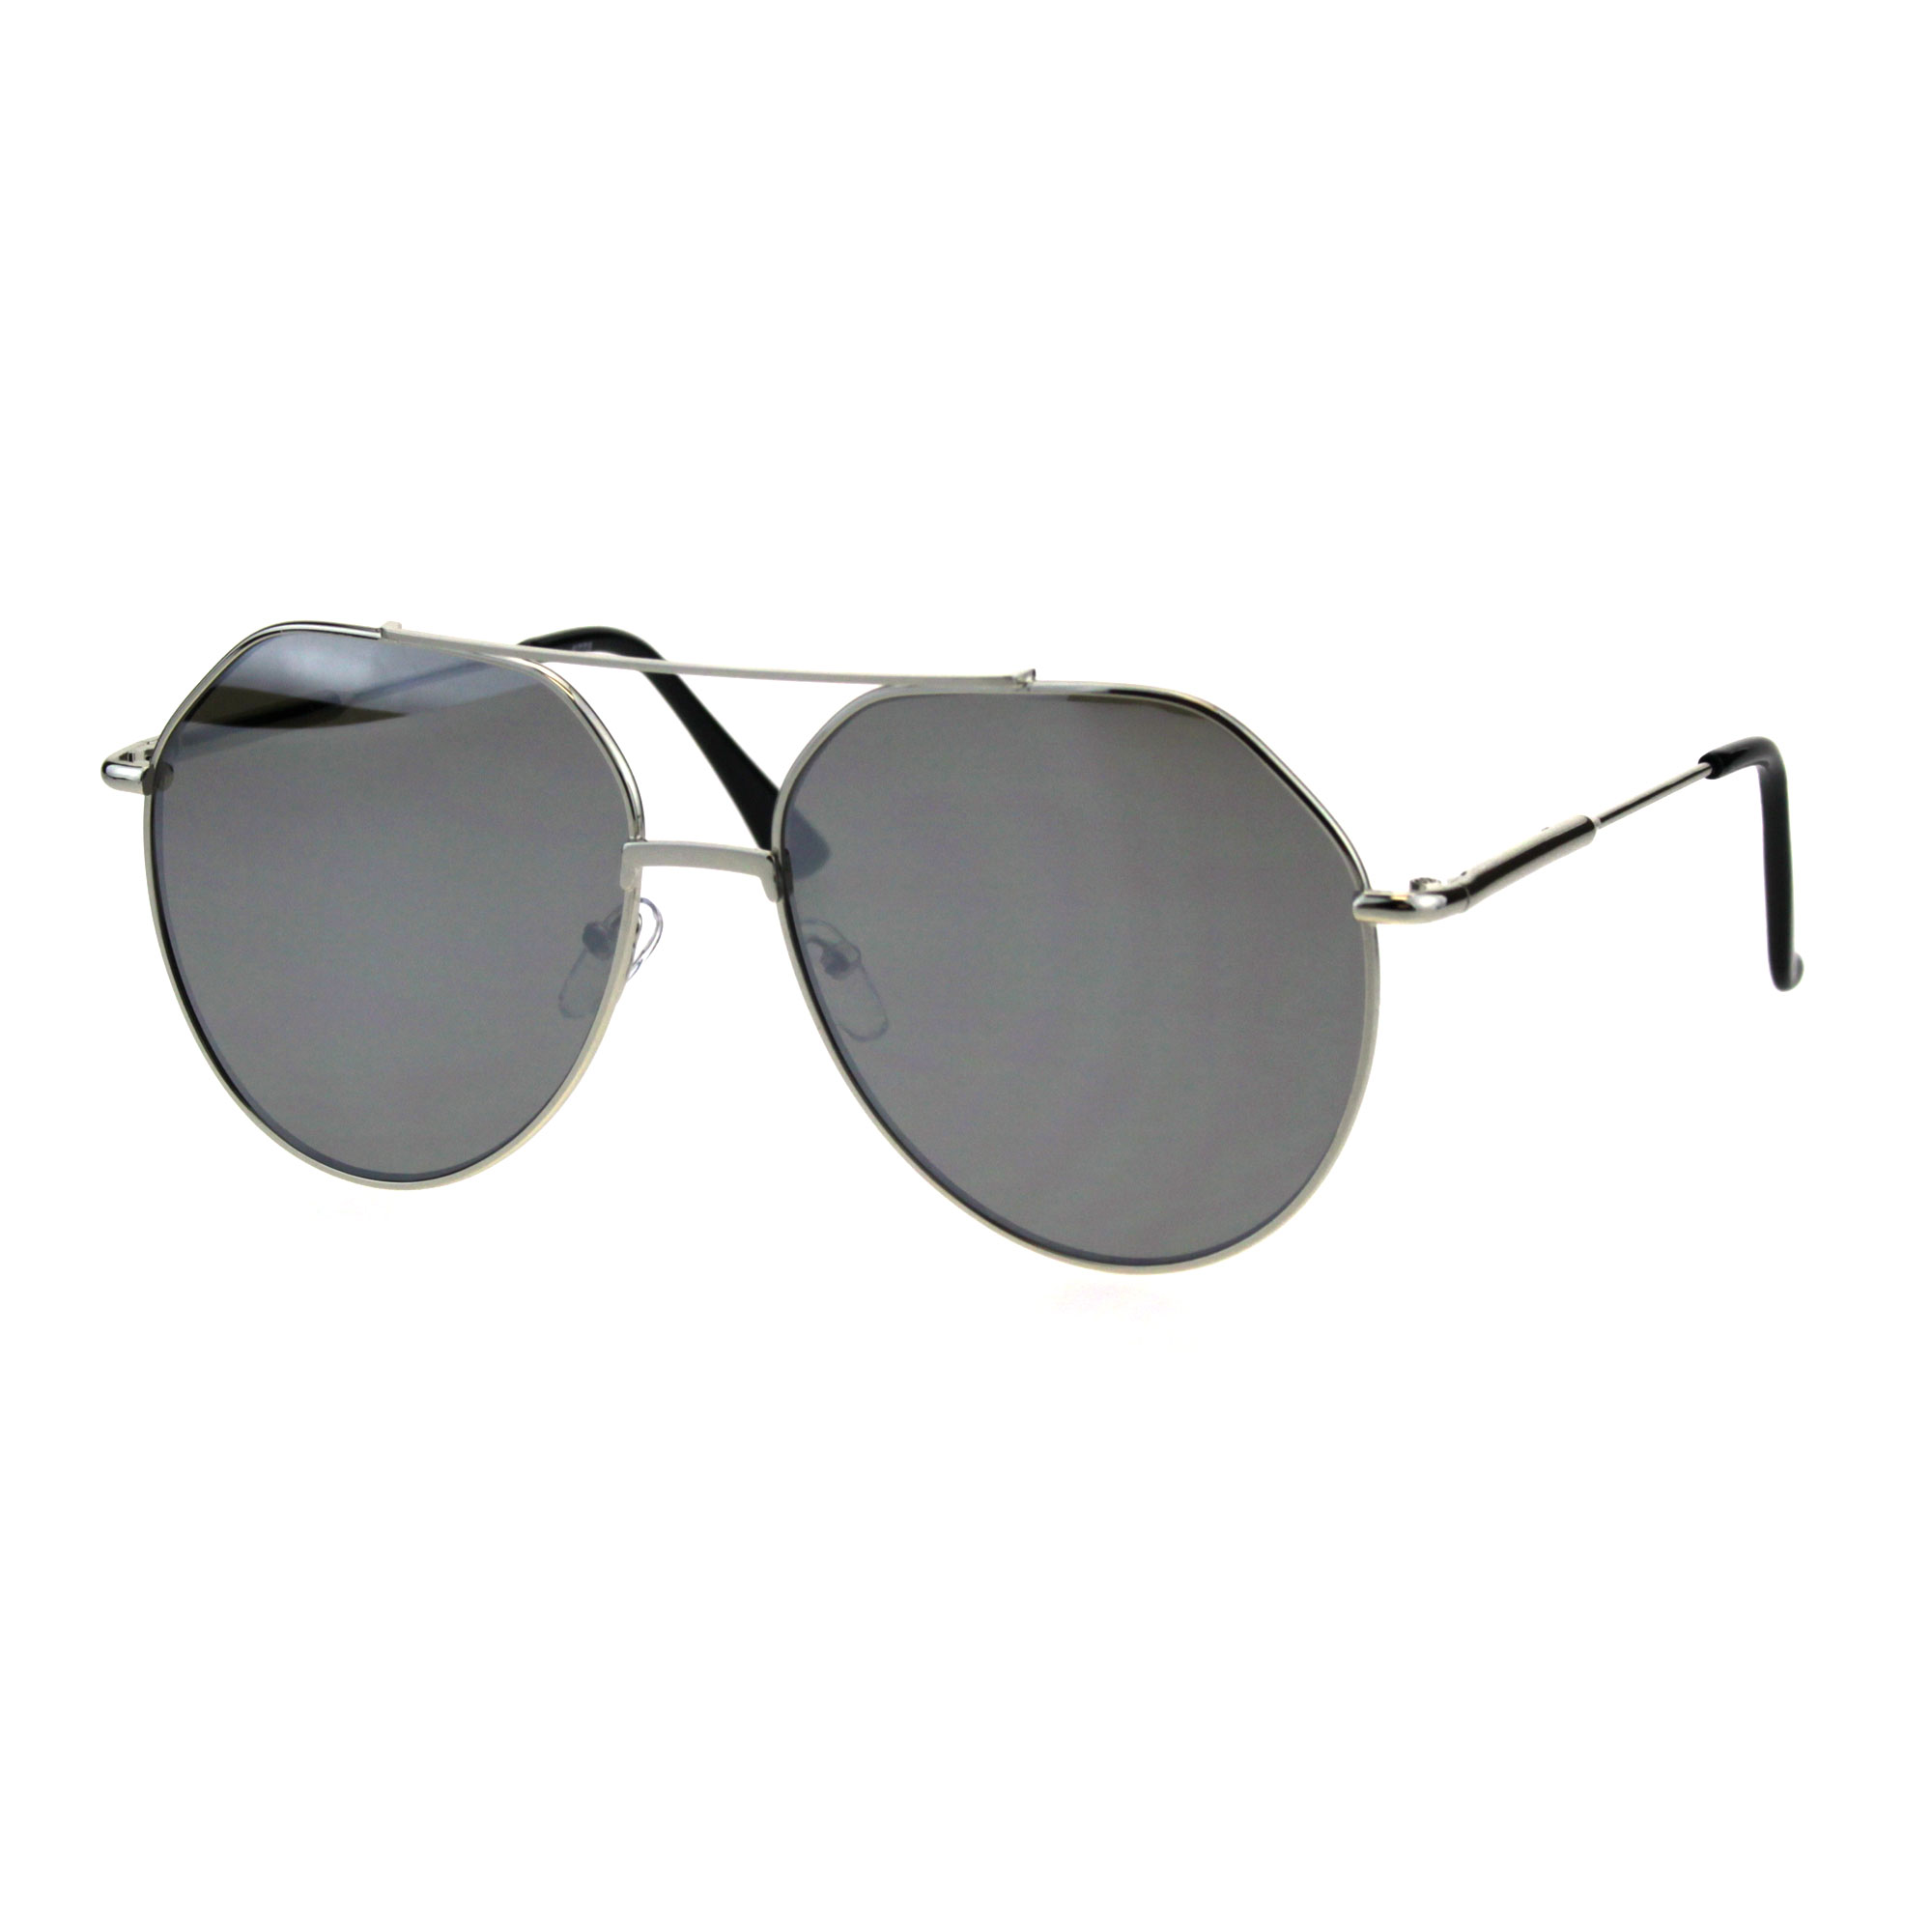 Mens Thin Metal Oversize Vintage Style Pilots Officer Sunglasses Silver Mirror - image 2 of 4